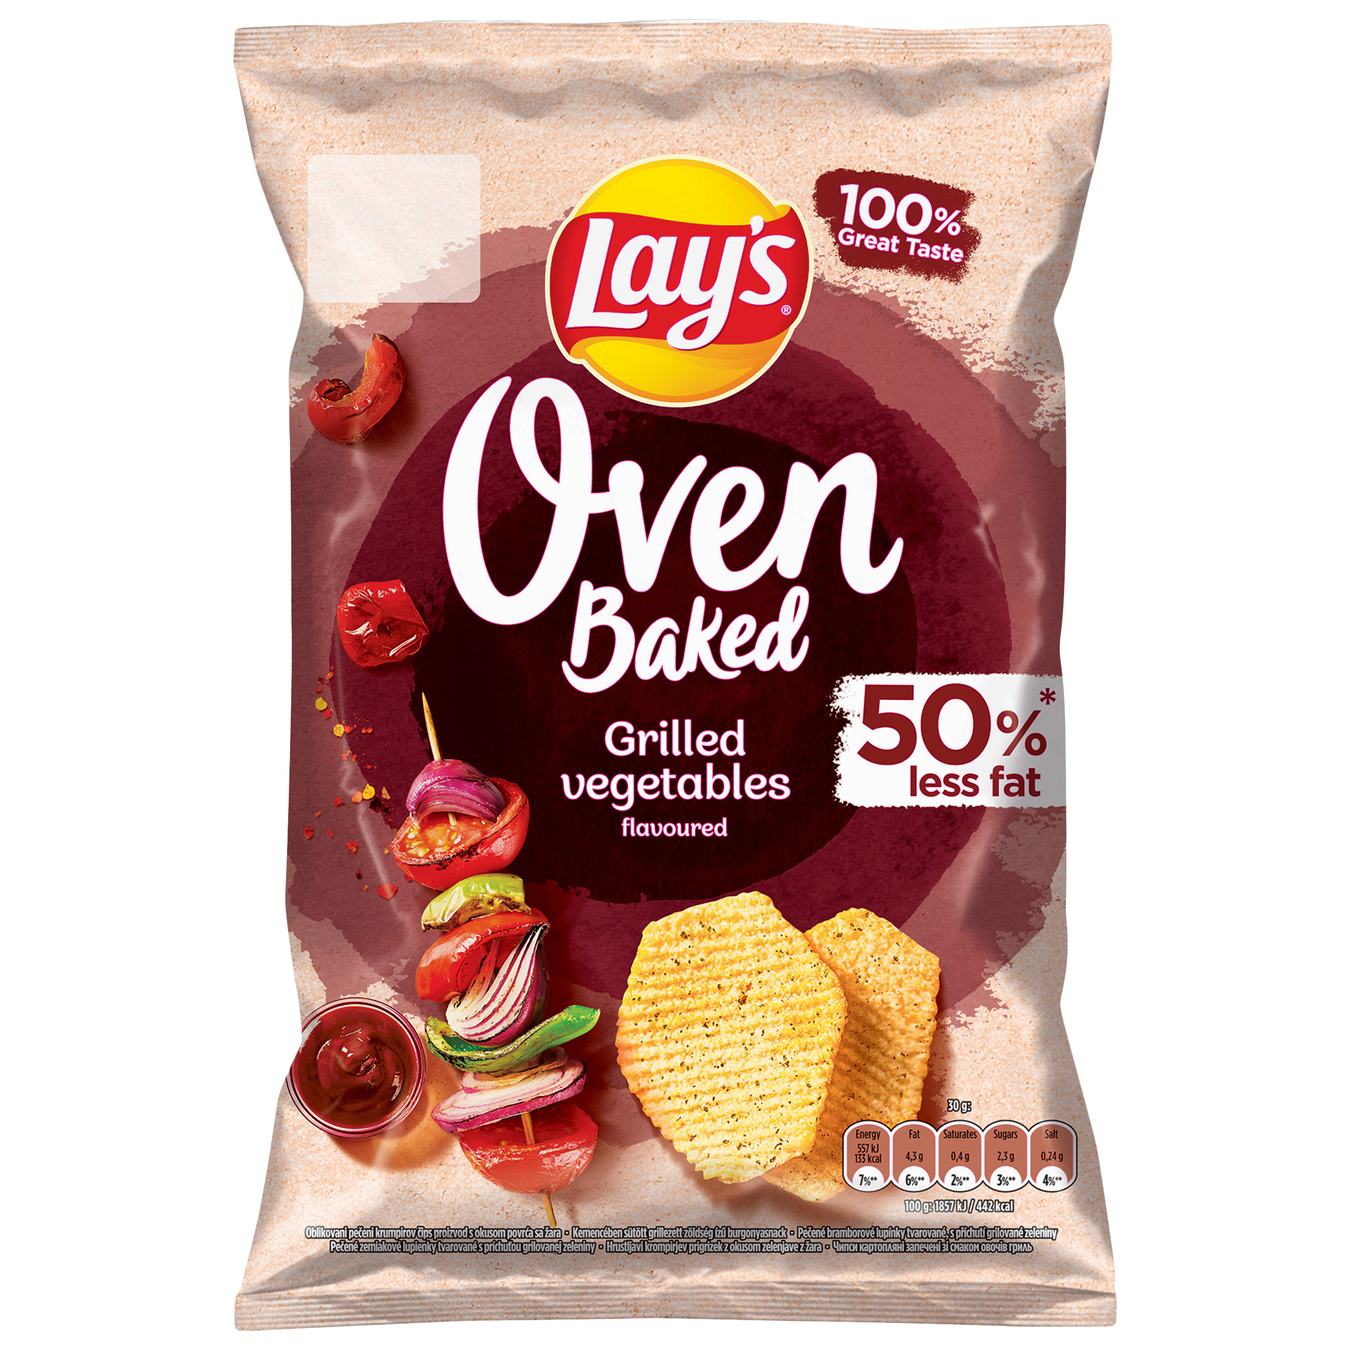 Chips Lay's Oven Baked Grilled vegetables potato 125g